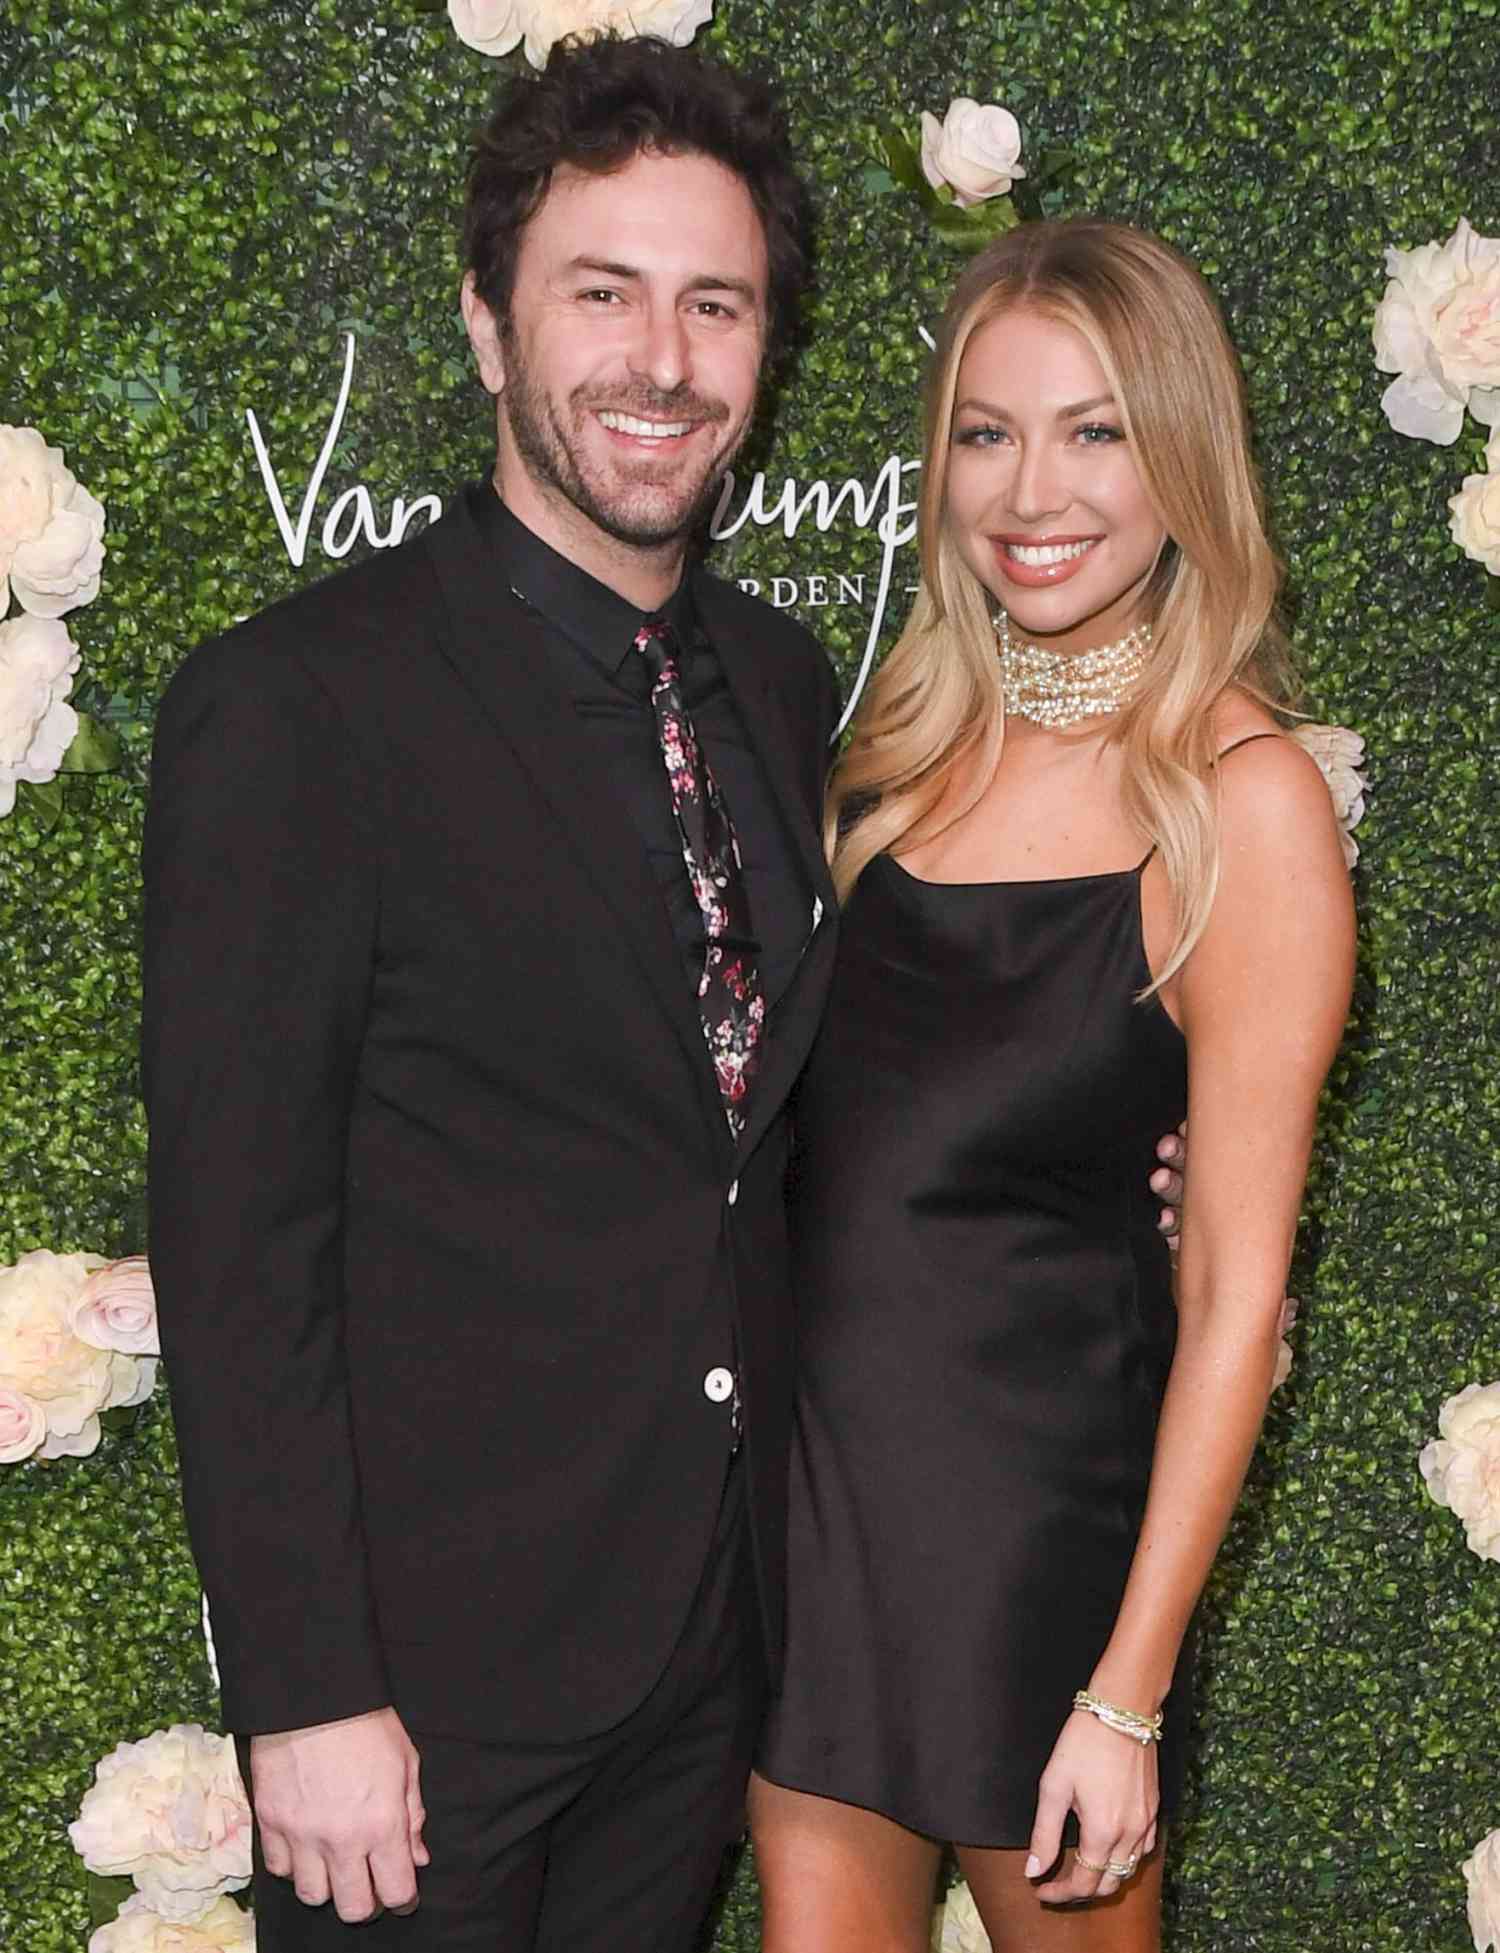 Beau Clark (L) and Stassi Schroeder attend the grand opening of Vanderpump Cocktail Garden at Caesars Palace on March 30, 2019 in Las Vegas, Nevada. (Photo by Mindy Small/FilmMagic)